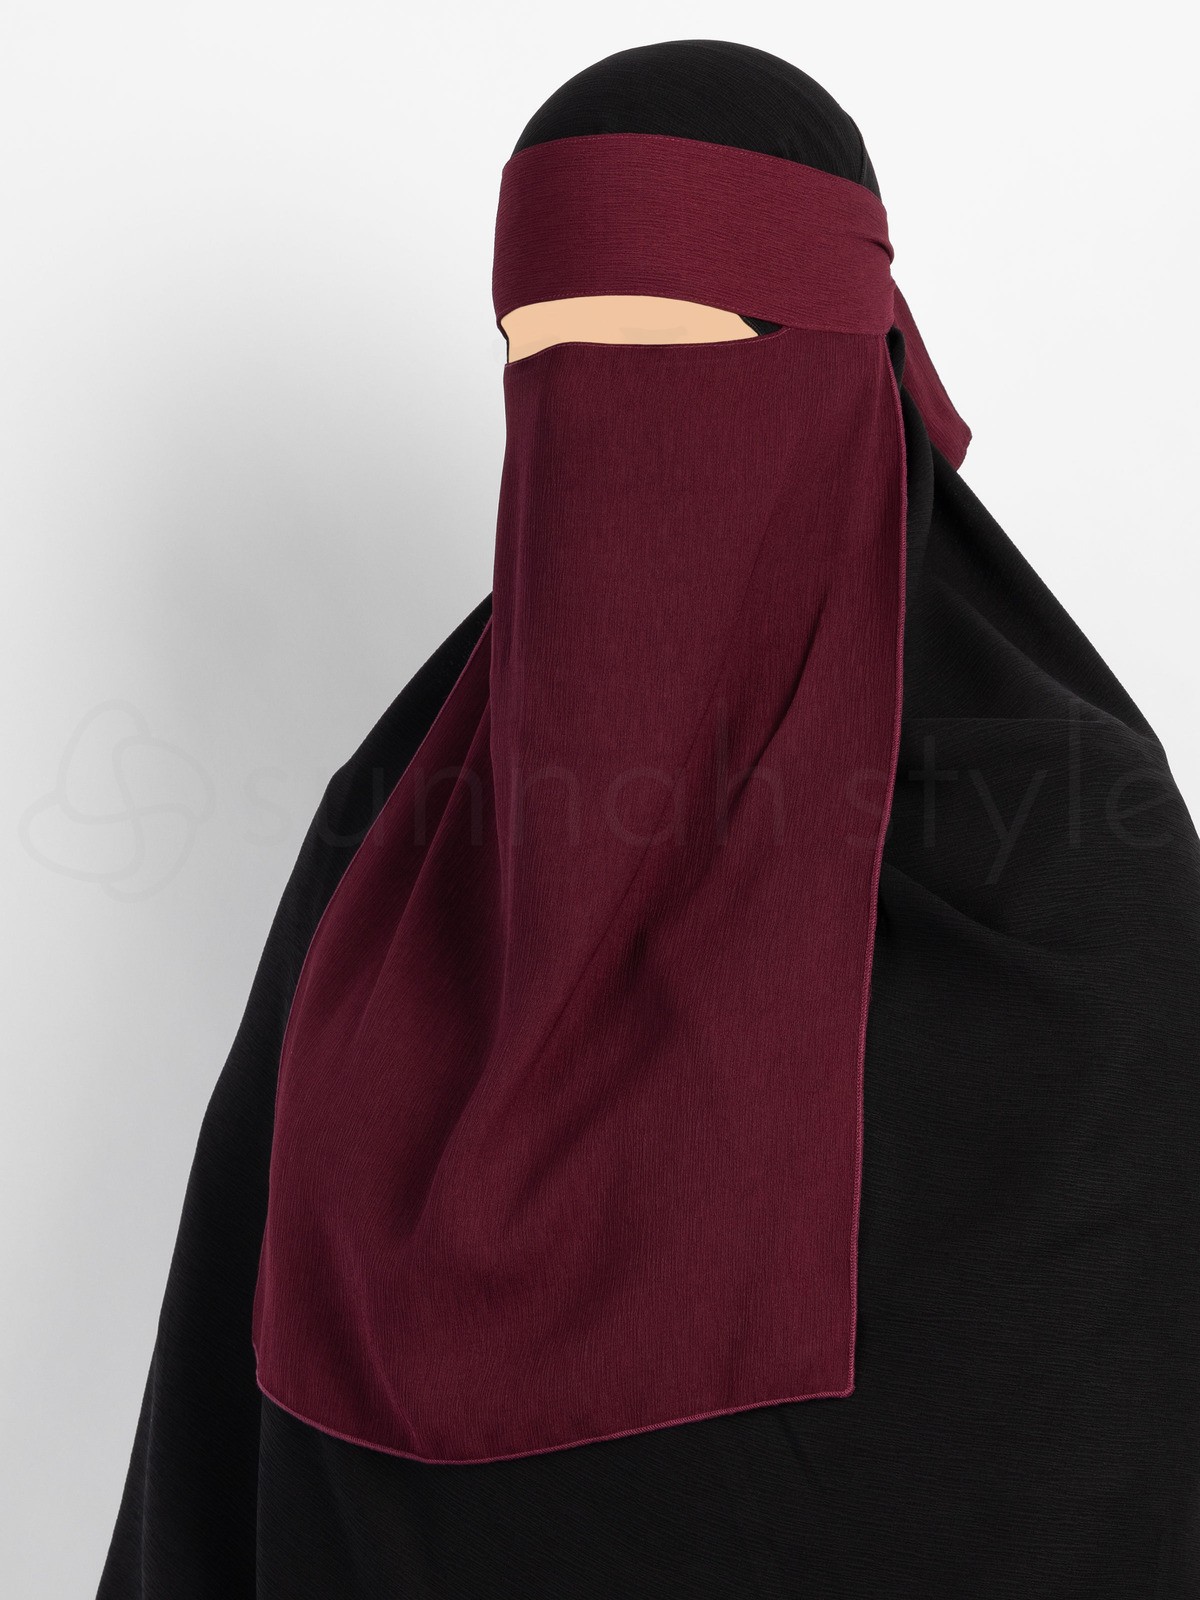 Sunnah Style - Brushed One Layer Niqab (Burgundy)